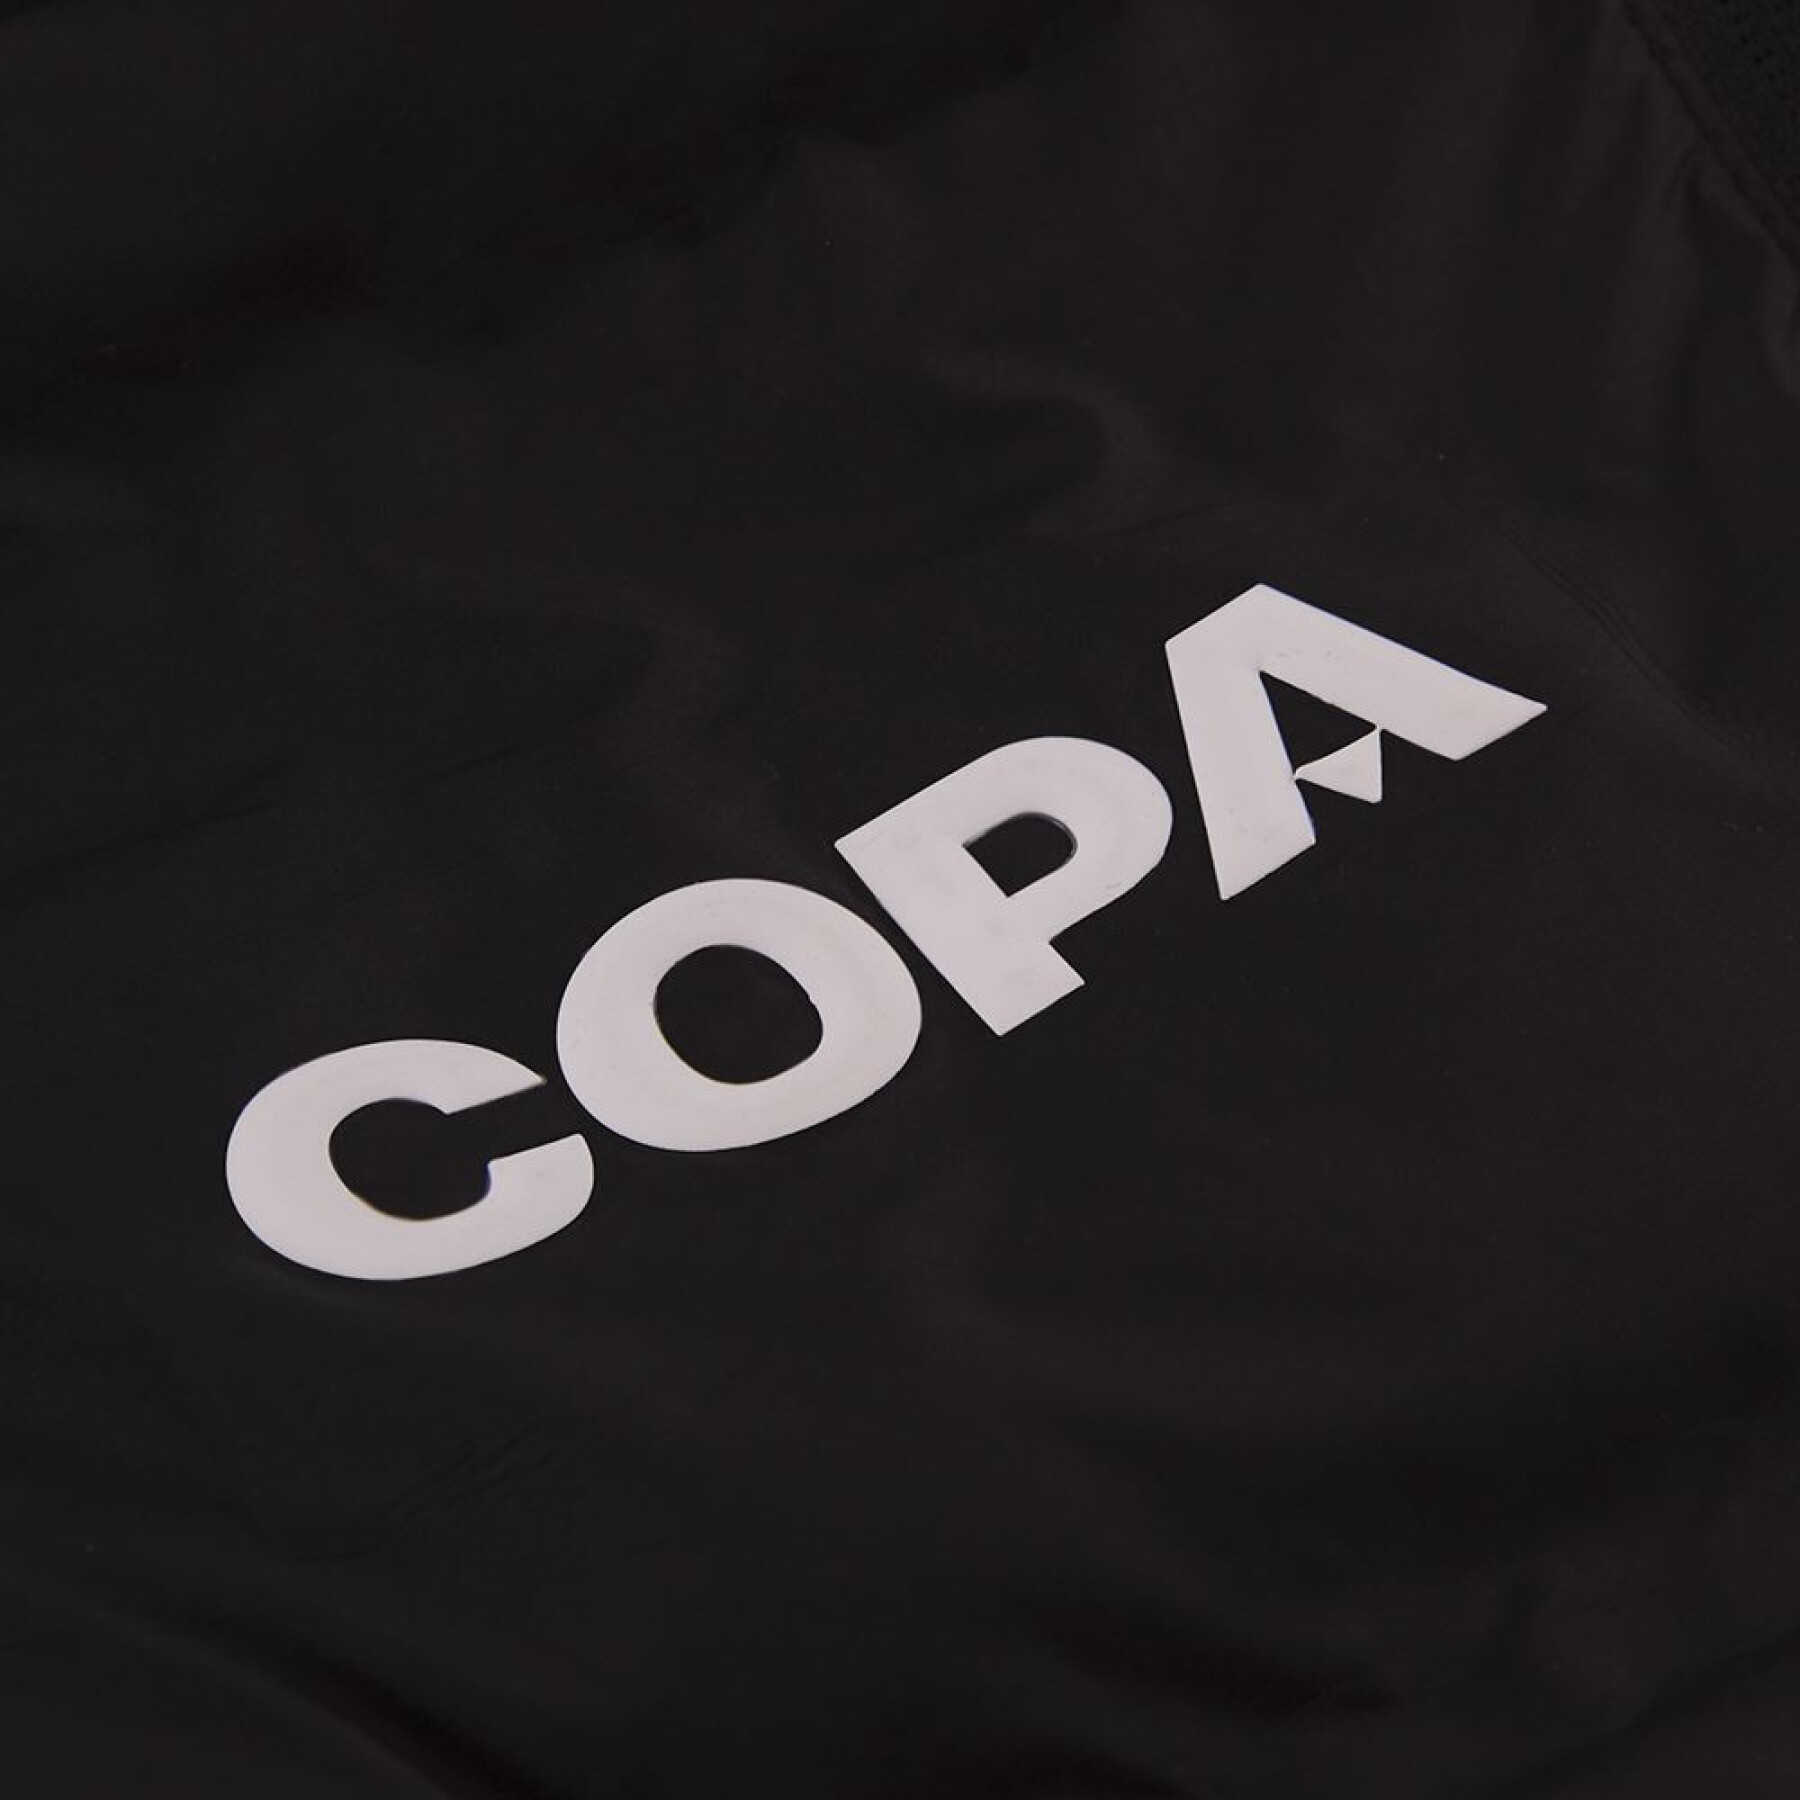 Long hooded jacket Copa Bench